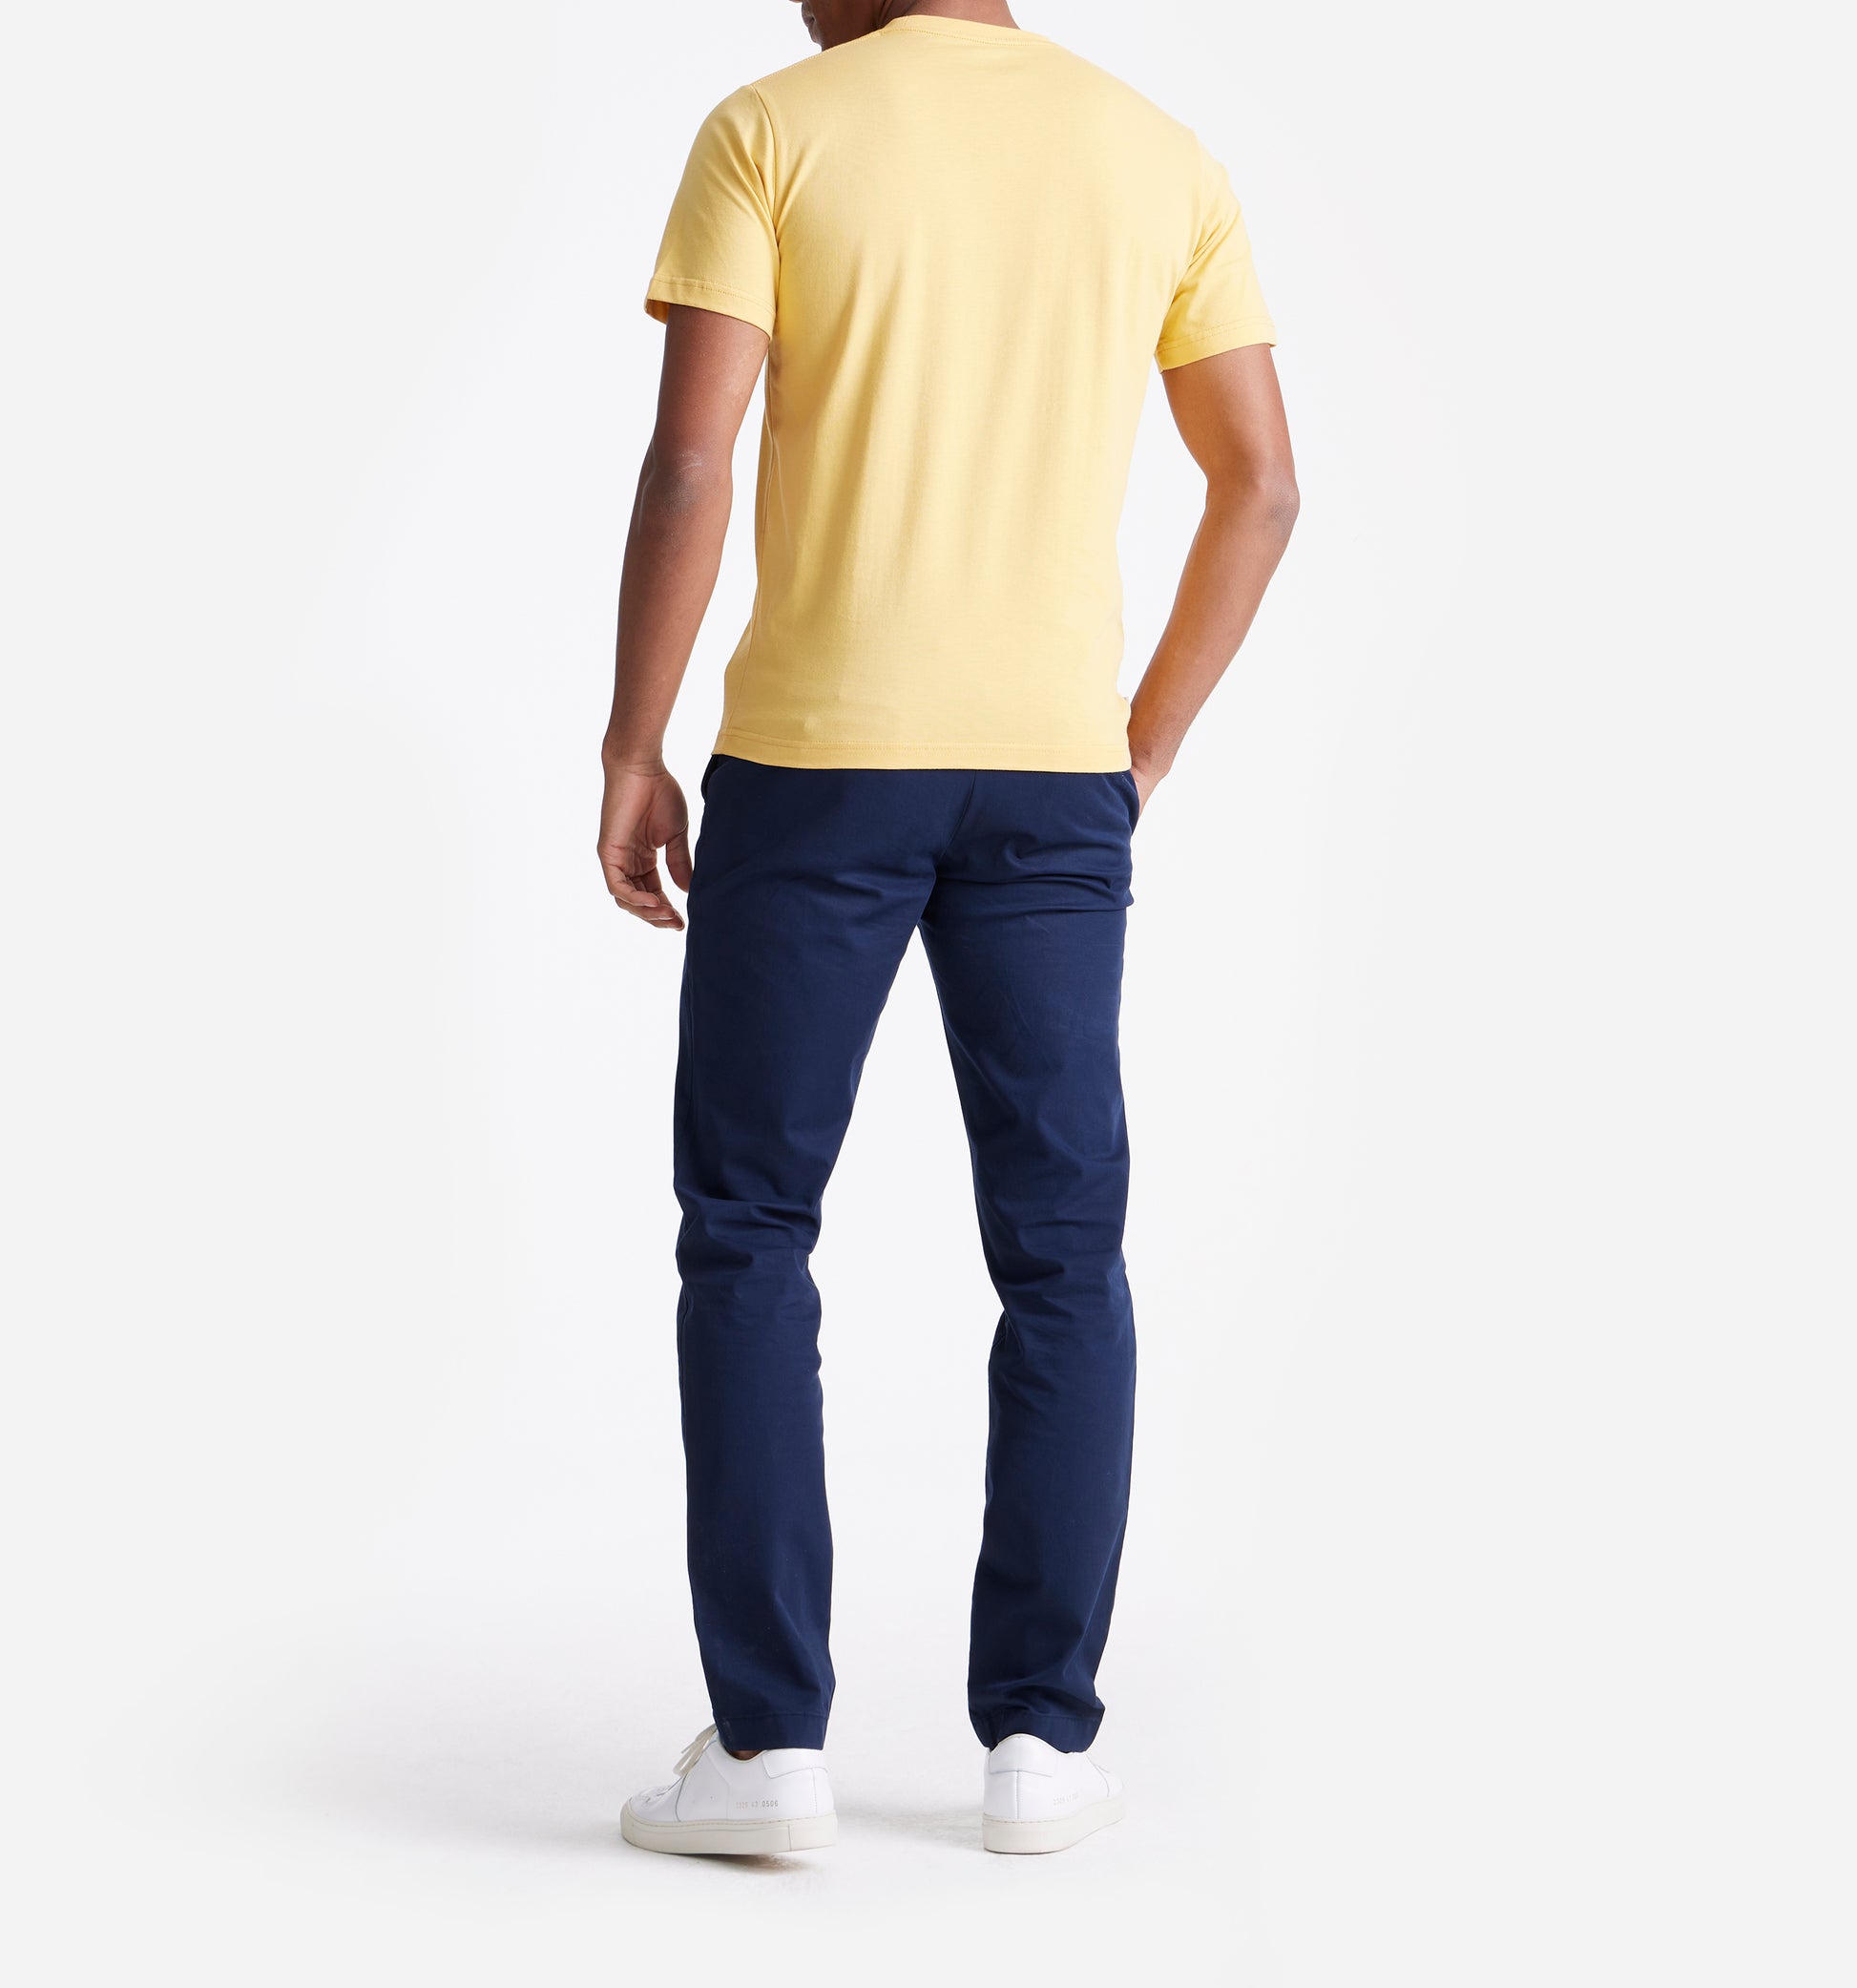 The Steve - Basic Cotton T-shirt In Dark Yellow From King Essentials